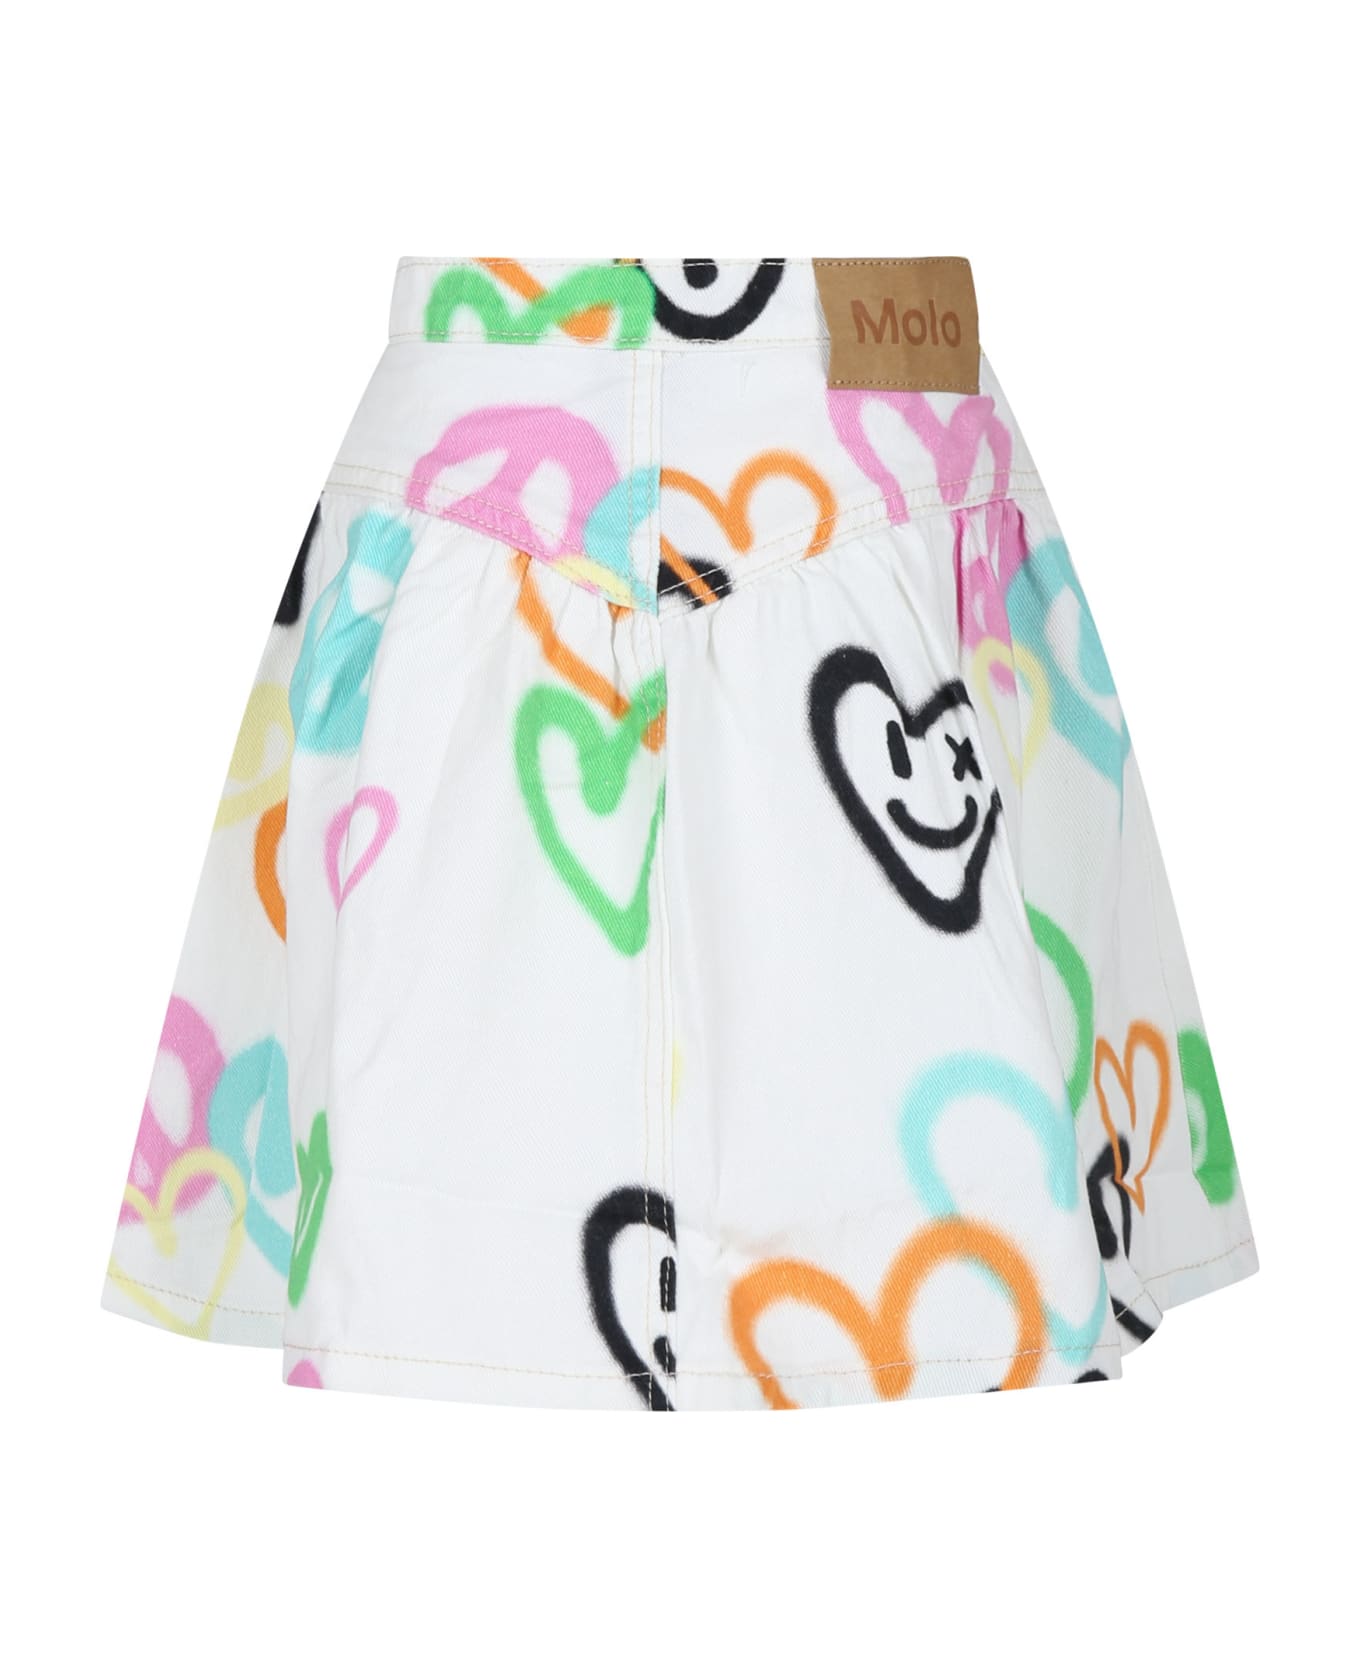 Molo White Skirt For Girl With Hearts Print - White ボトムス